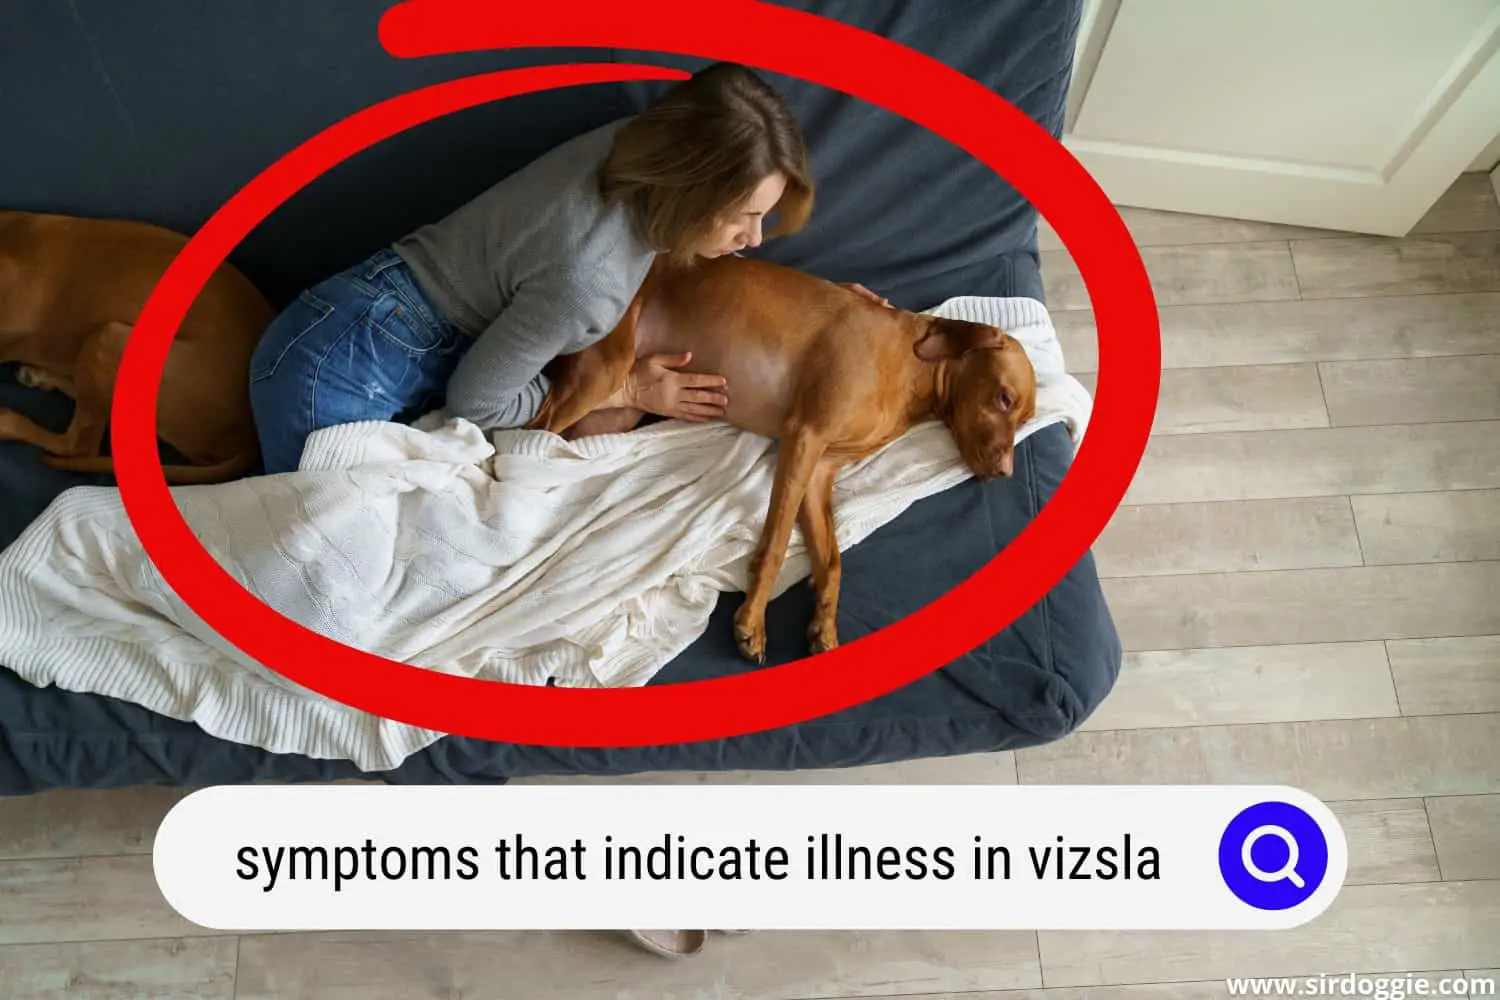 A pet owner taking care of her Vizsla dog with illness